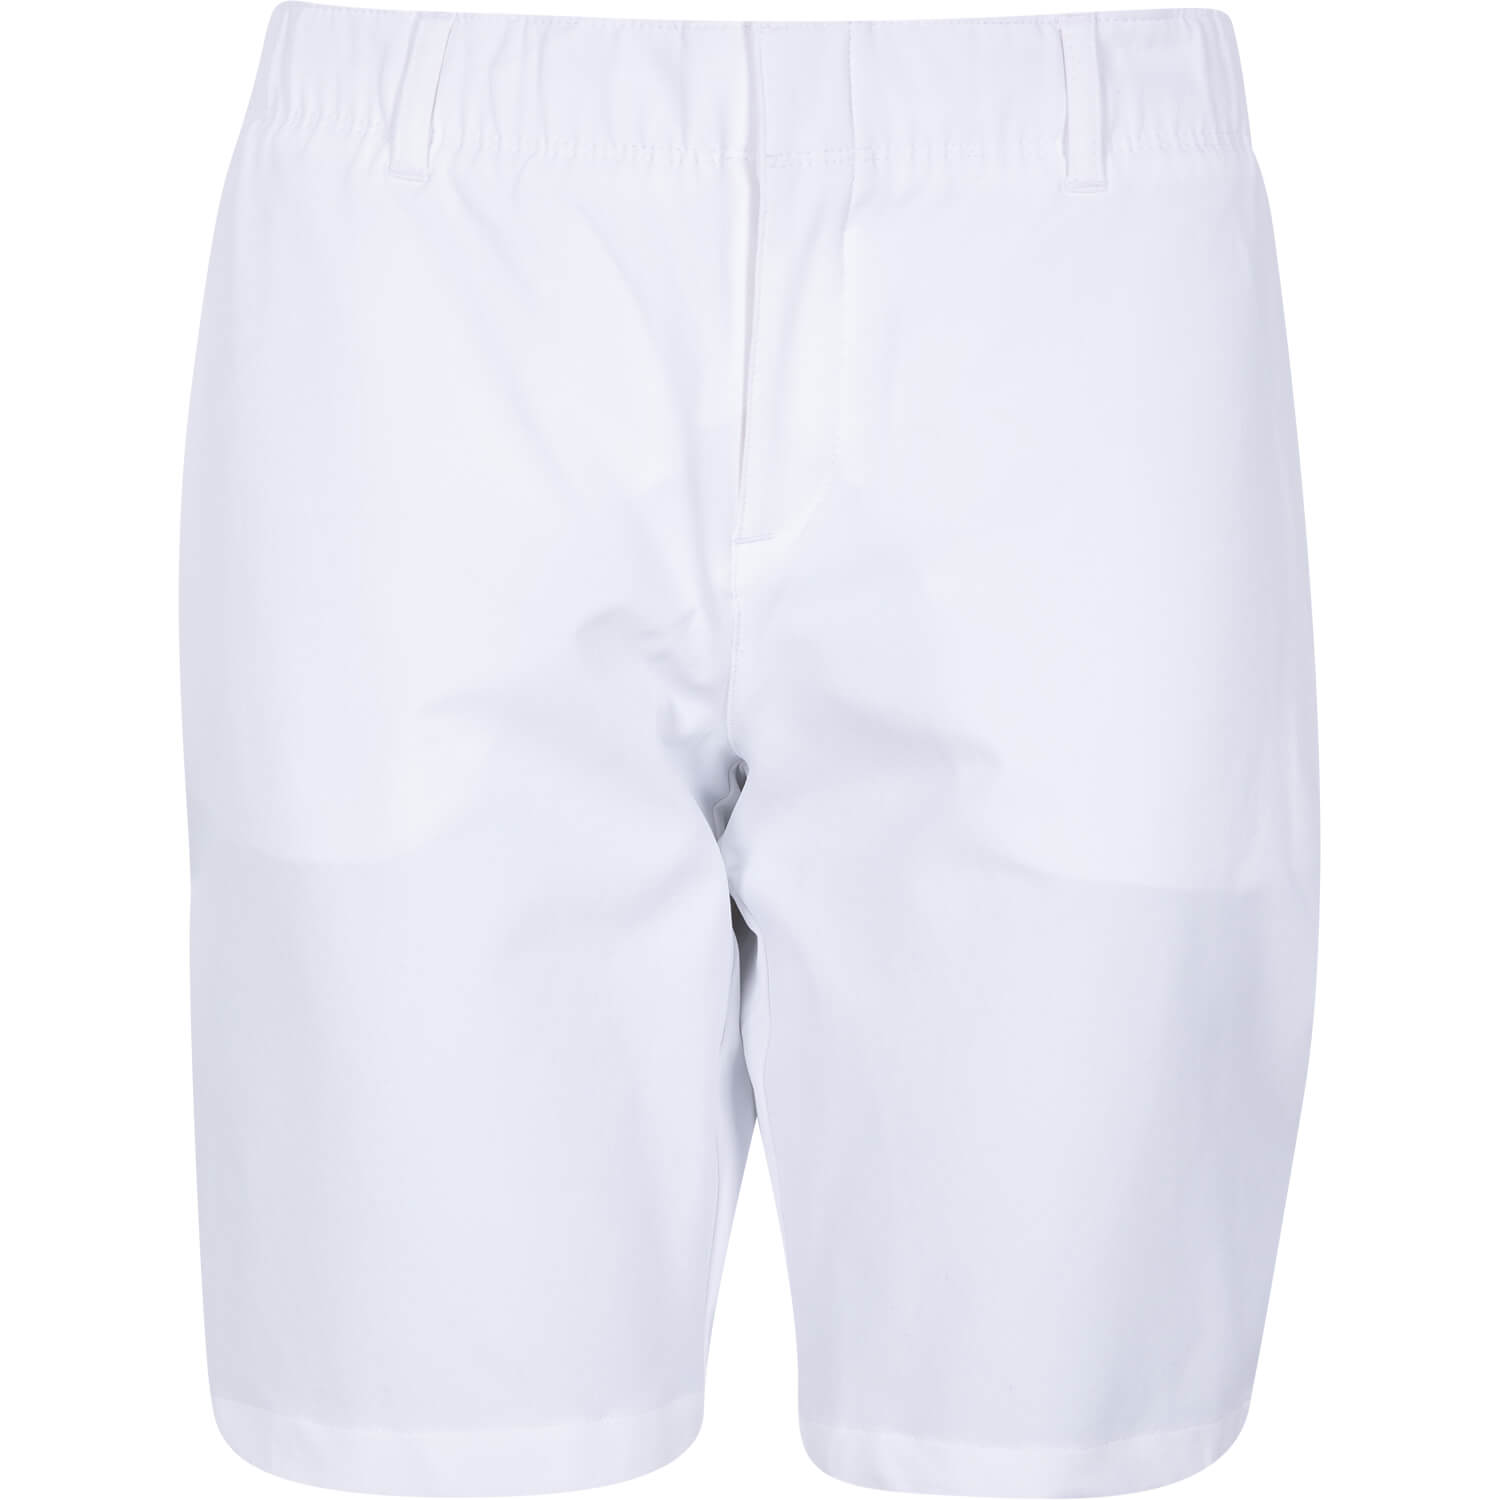 Under Armour Links Shorts White